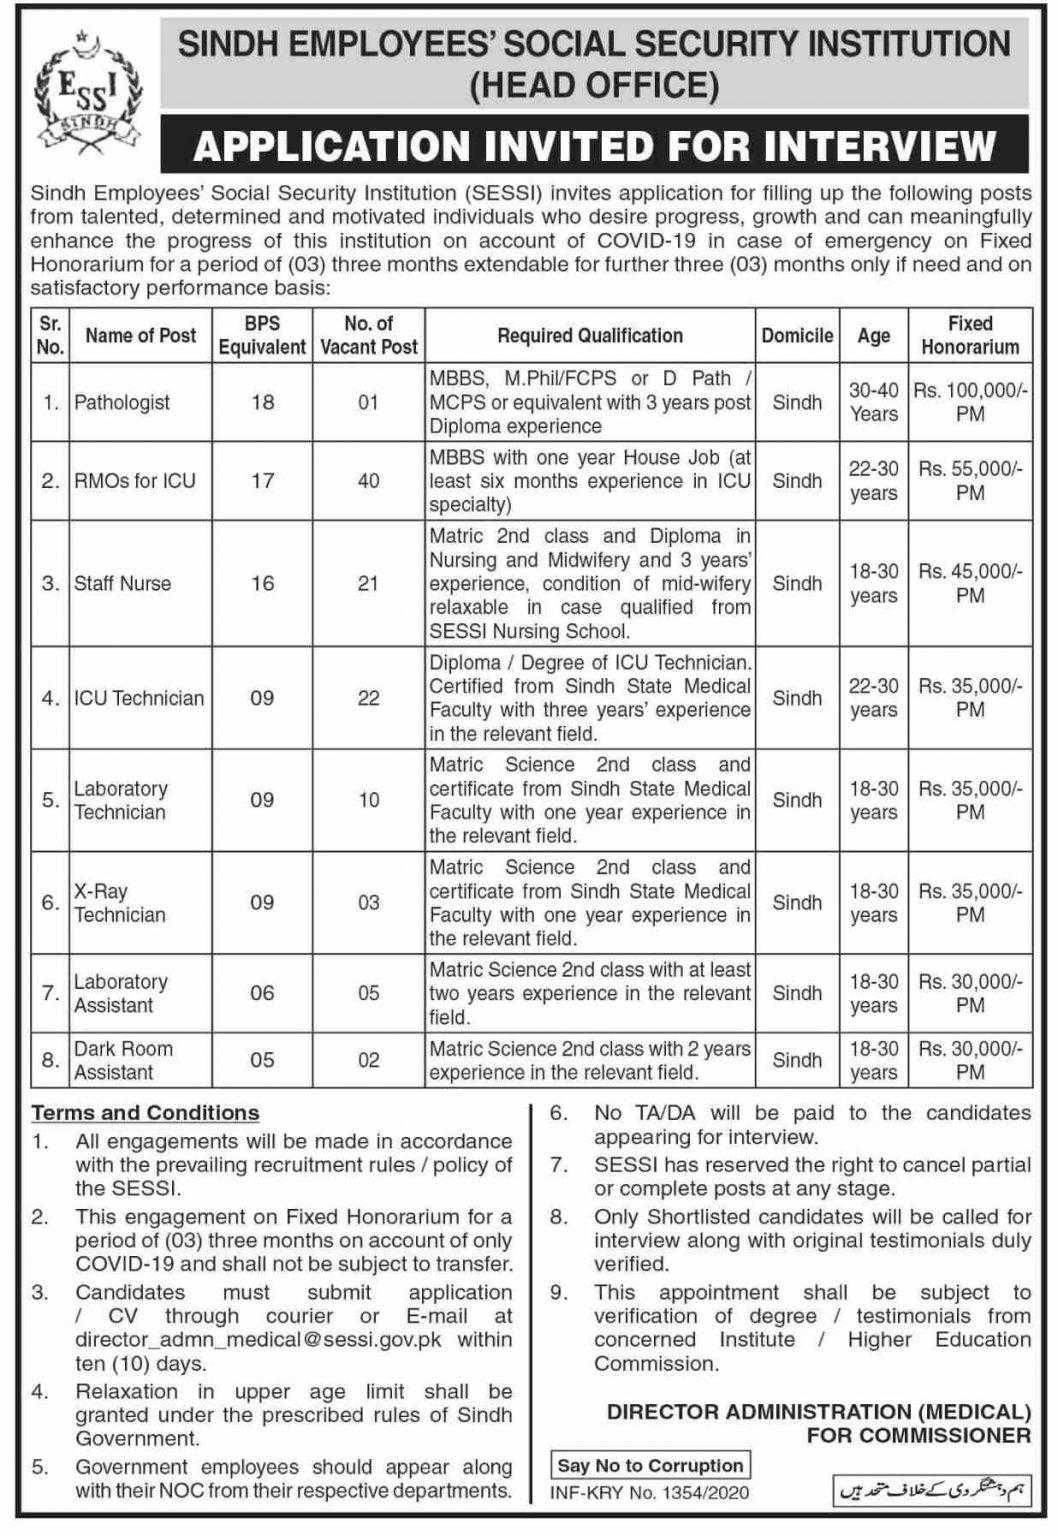 Department of social security administration jobs